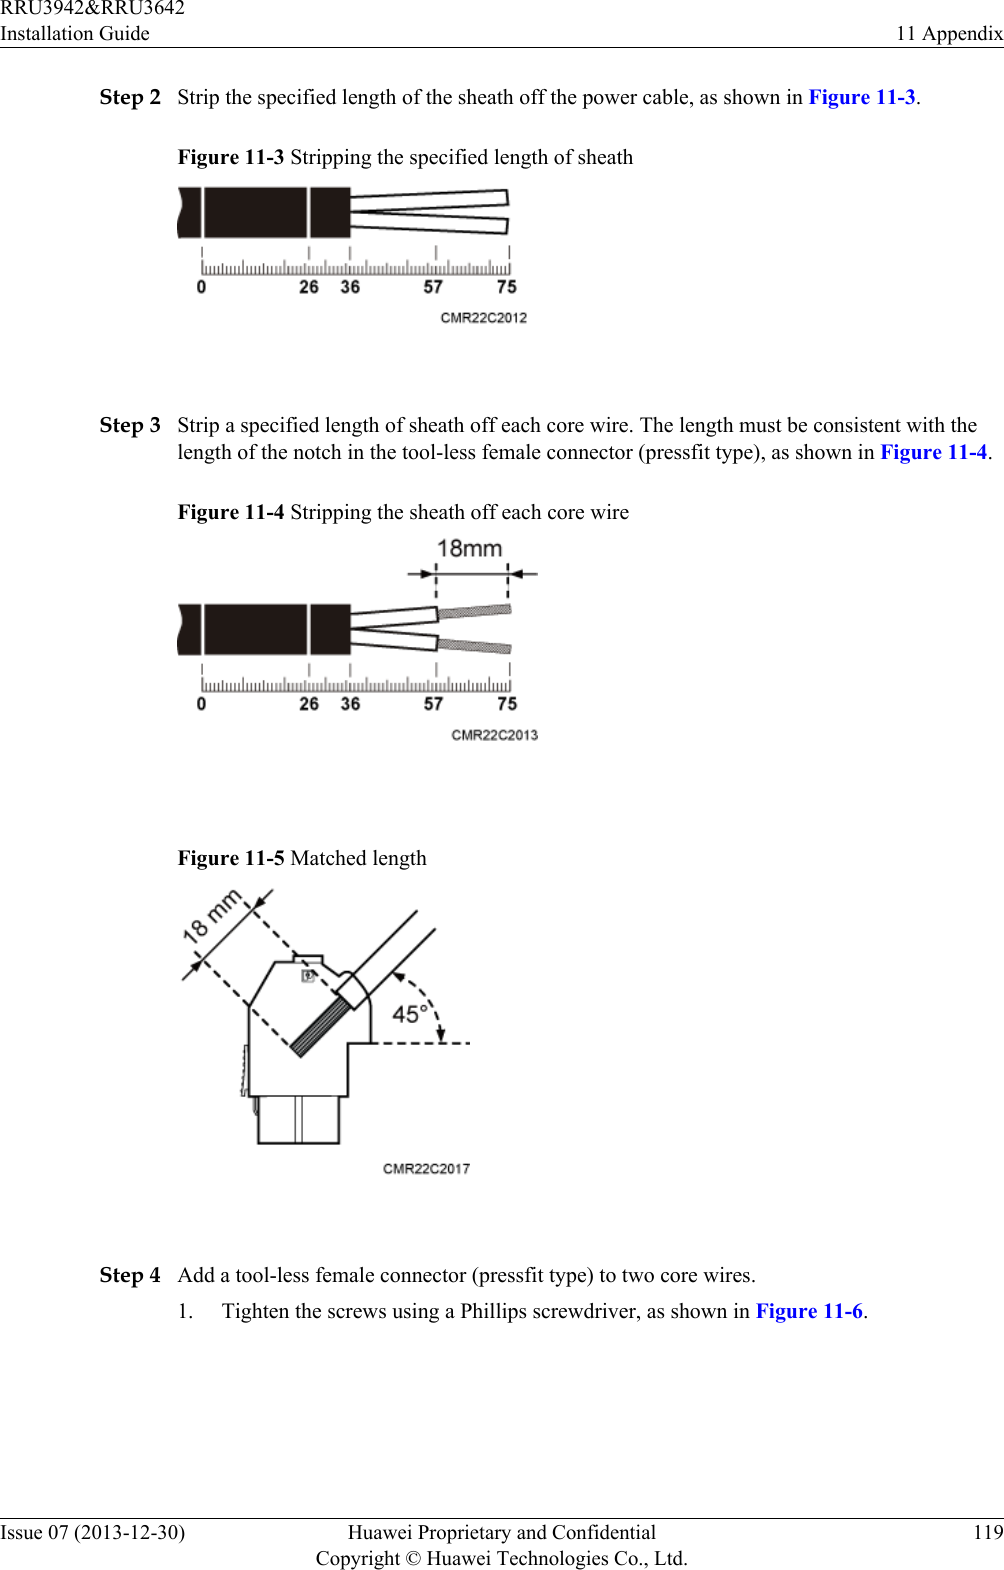 Step 2 Strip the specified length of the sheath off the power cable, as shown in Figure 11-3.Figure 11-3 Stripping the specified length of sheath Step 3 Strip a specified length of sheath off each core wire. The length must be consistent with thelength of the notch in the tool-less female connector (pressfit type), as shown in Figure 11-4.Figure 11-4 Stripping the sheath off each core wire Figure 11-5 Matched length Step 4 Add a tool-less female connector (pressfit type) to two core wires.1. Tighten the screws using a Phillips screwdriver, as shown in Figure 11-6.RRU3942&amp;RRU3642Installation Guide 11 AppendixIssue 07 (2013-12-30) Huawei Proprietary and ConfidentialCopyright © Huawei Technologies Co., Ltd.119